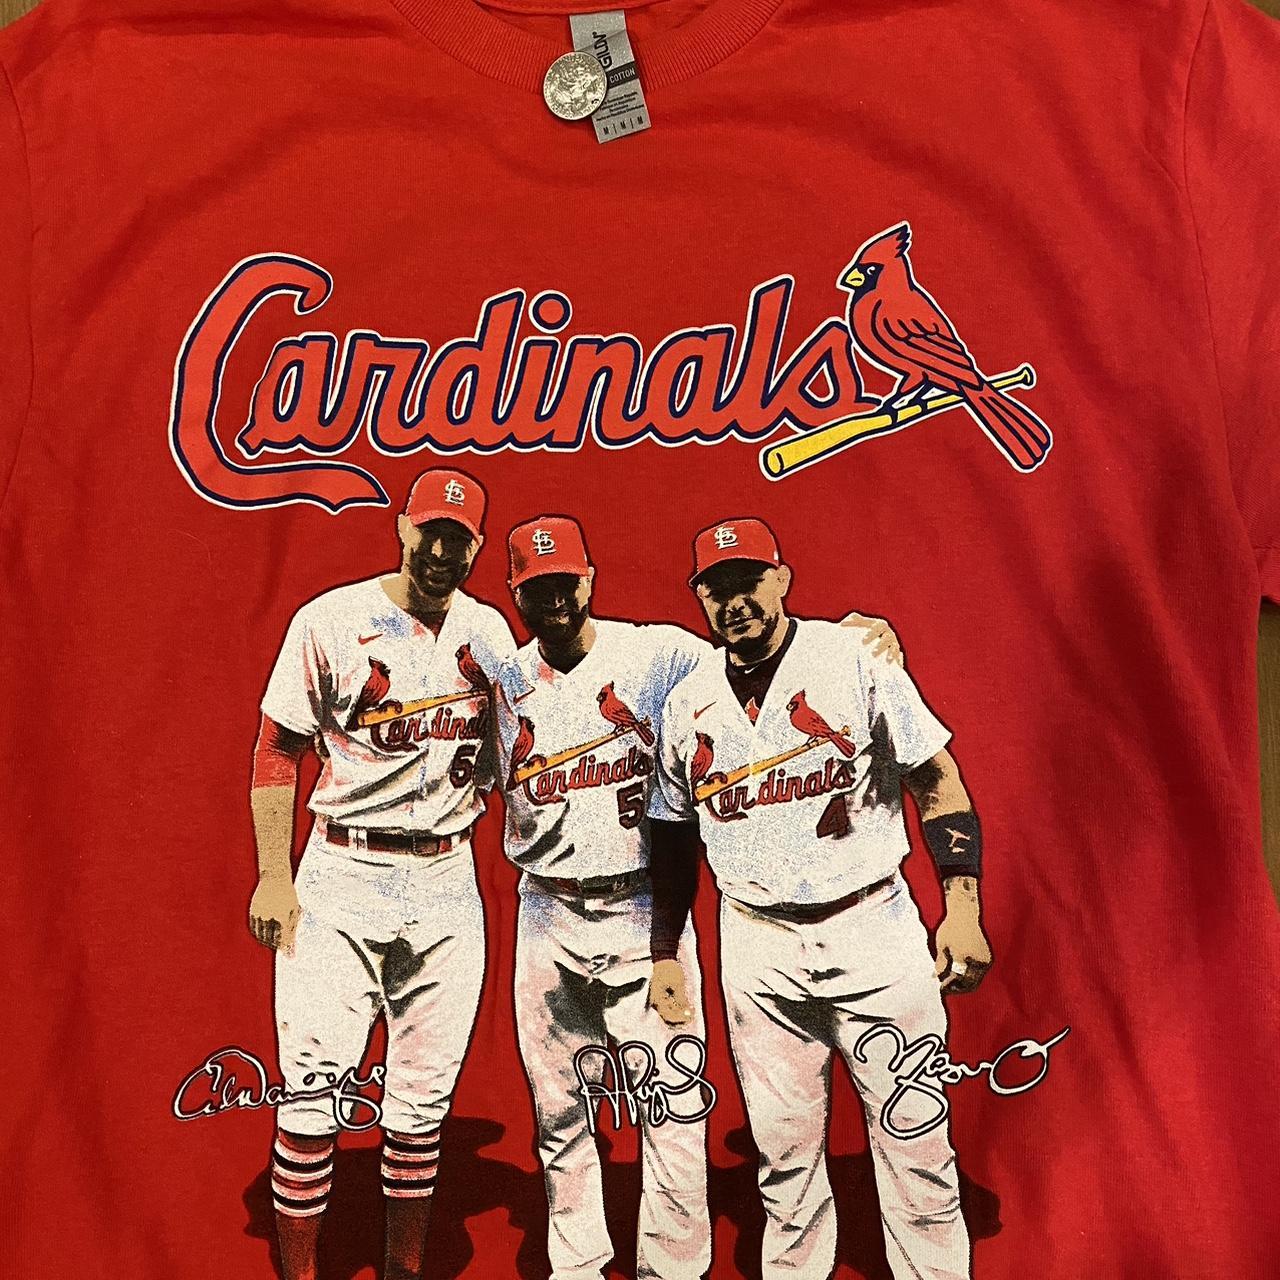 St. Louis Cardinals Graphic T-Shirt with a red - Depop